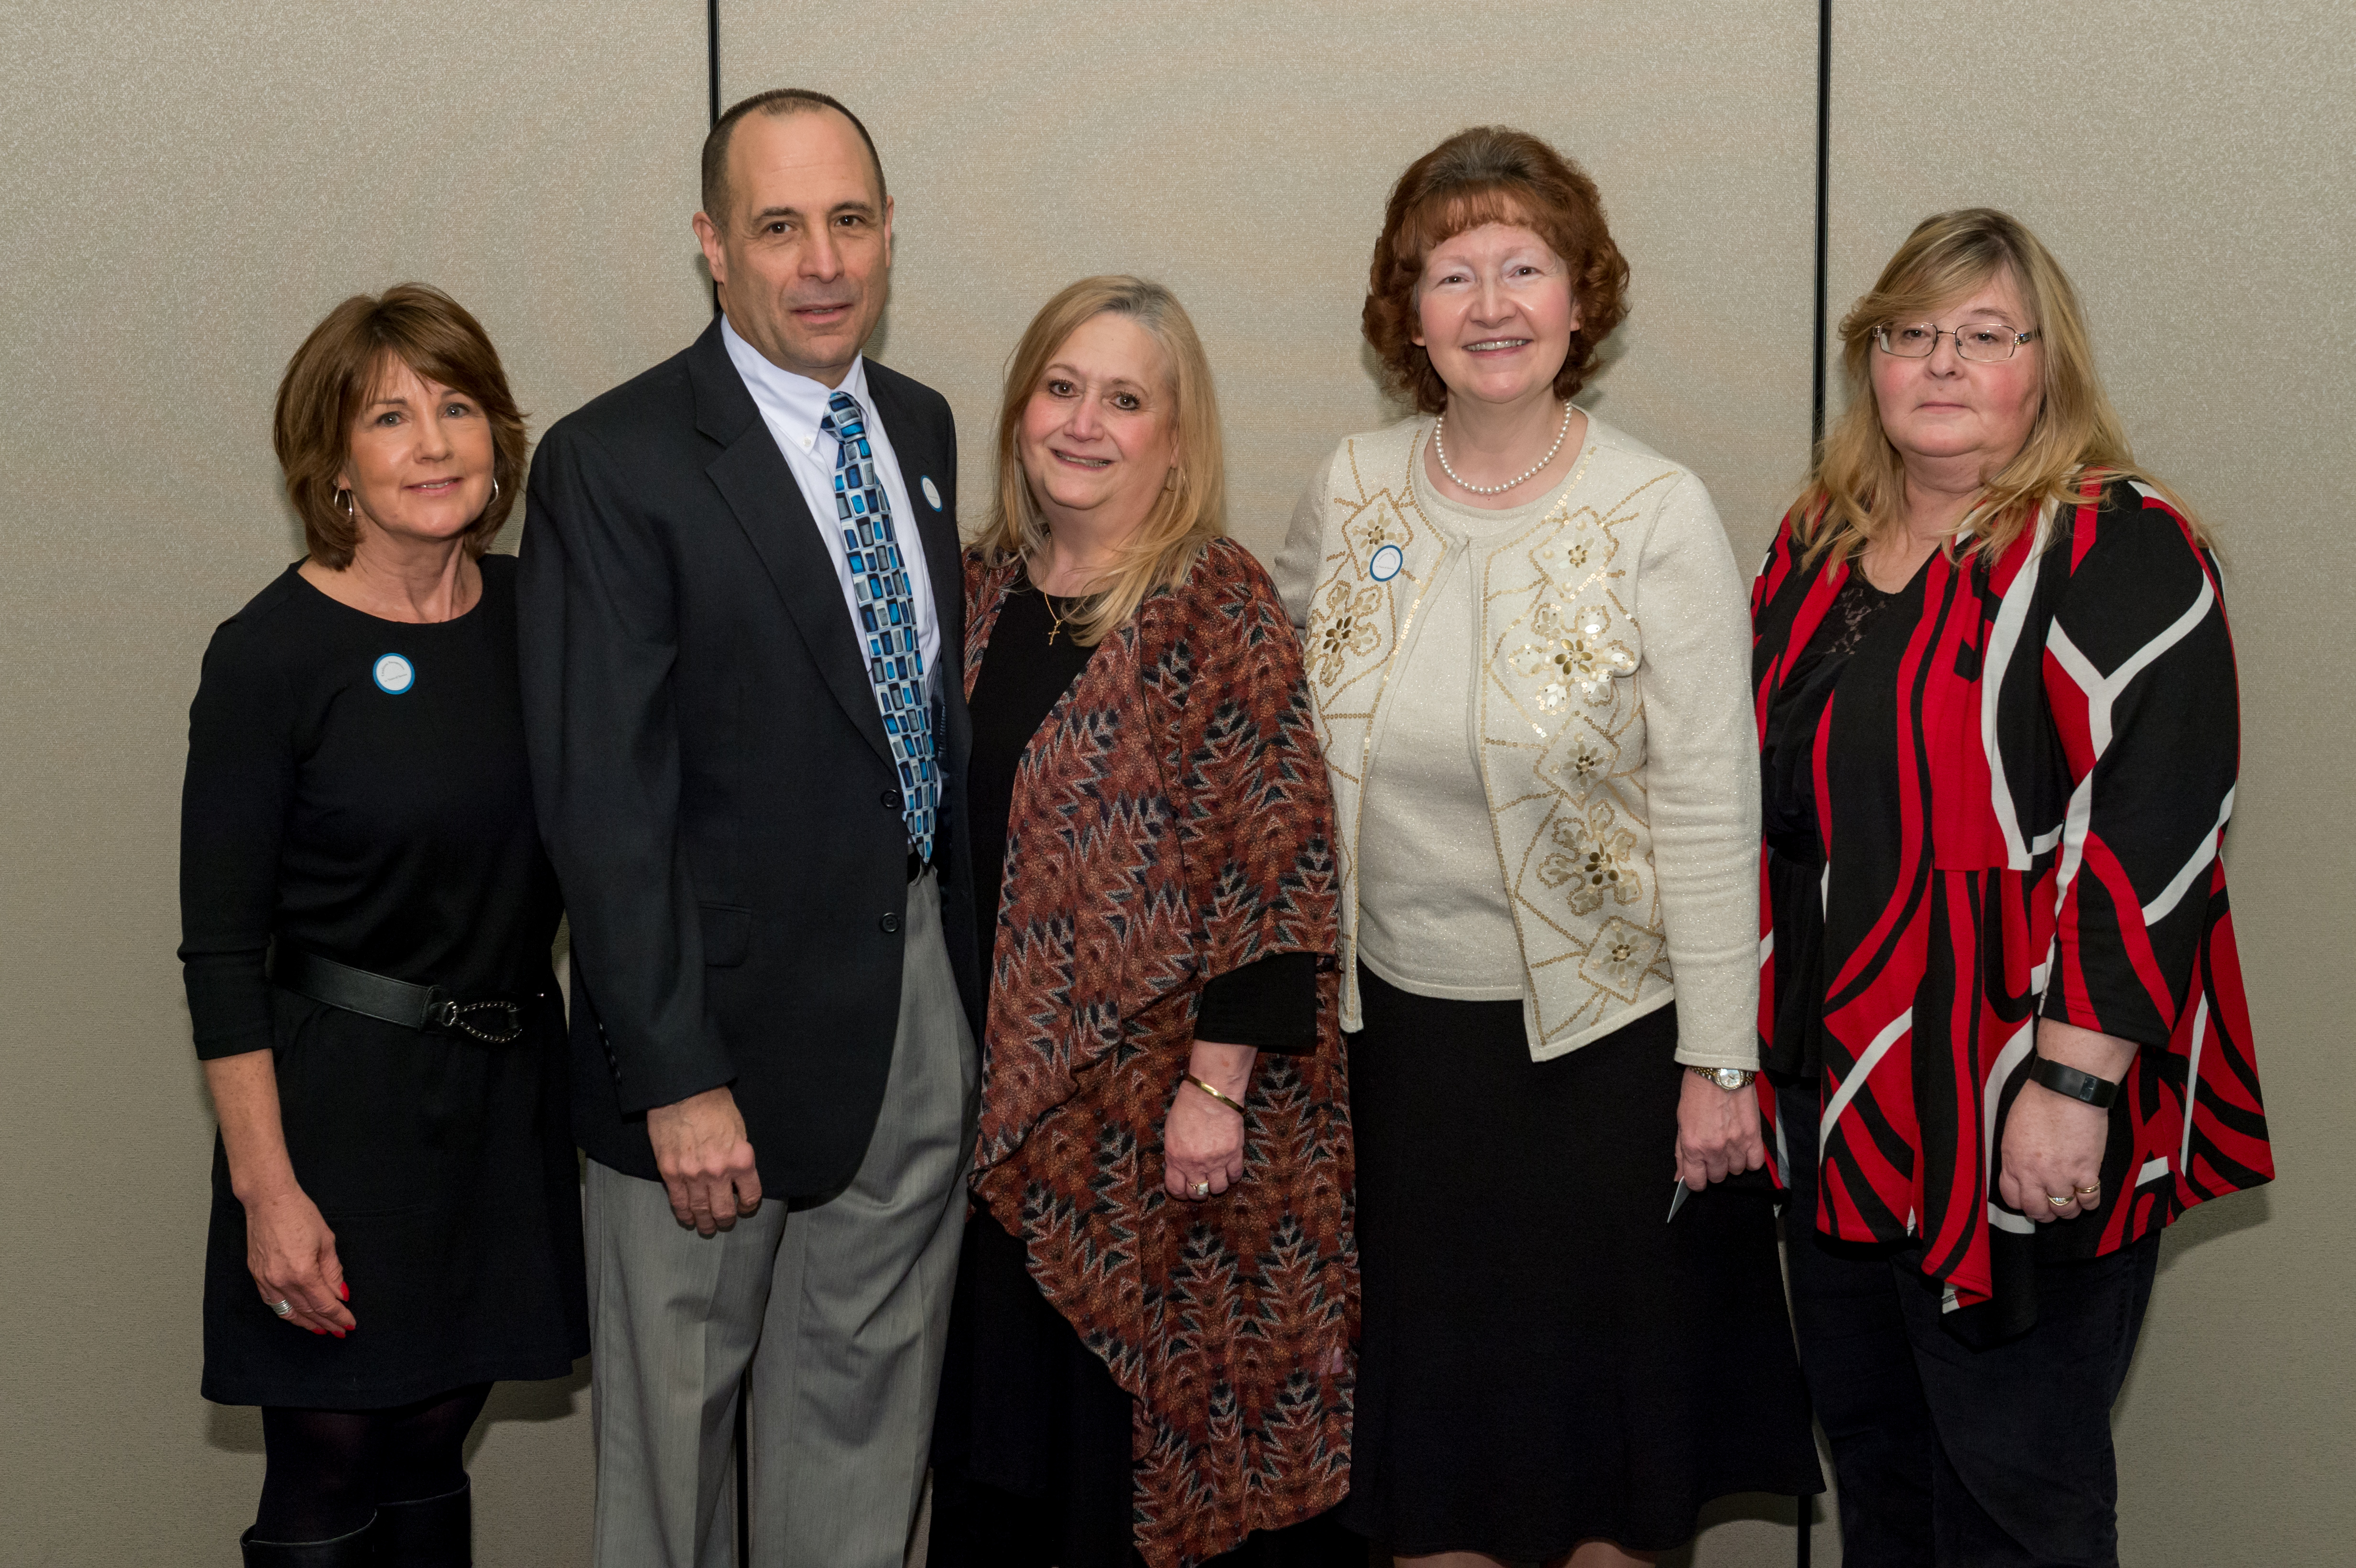 Employees with 20 years of service (left to right) Mary Shick, Rey Notareschi, Margaret Sanders, Deborah Myers and Deborah Tummel